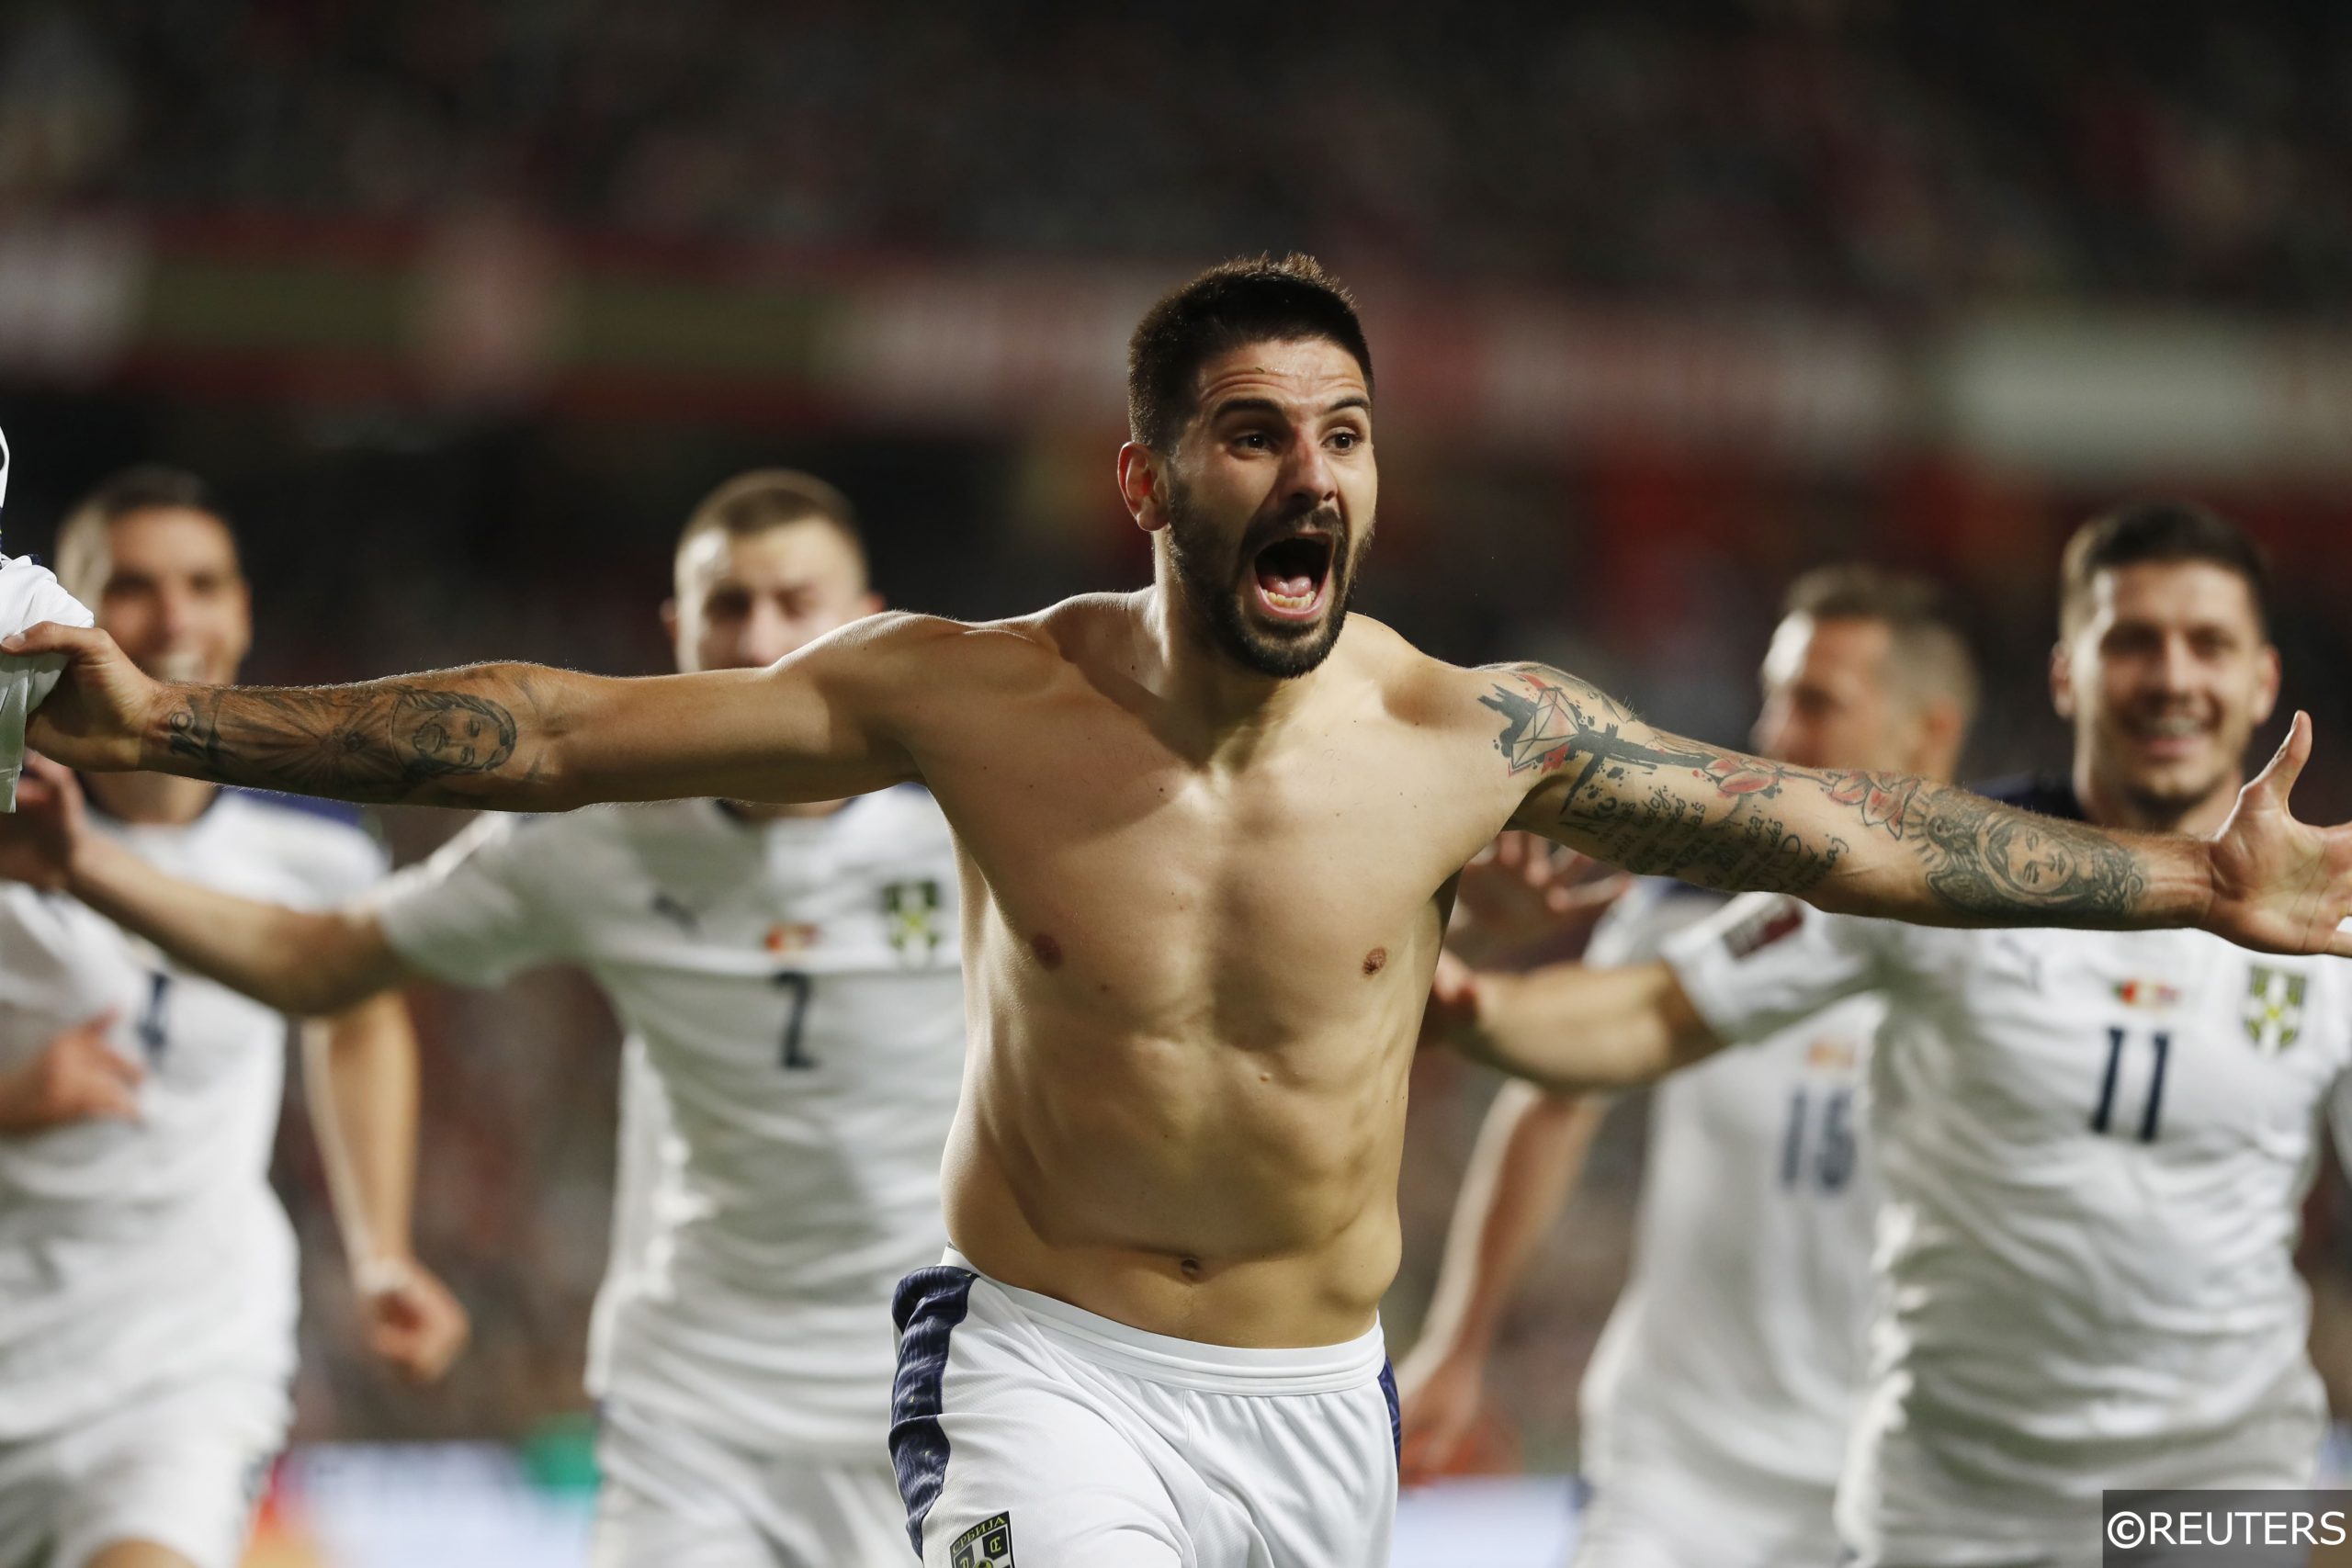 2022 World Cup daily acca: Best bets for Thursday's action 01 12 22